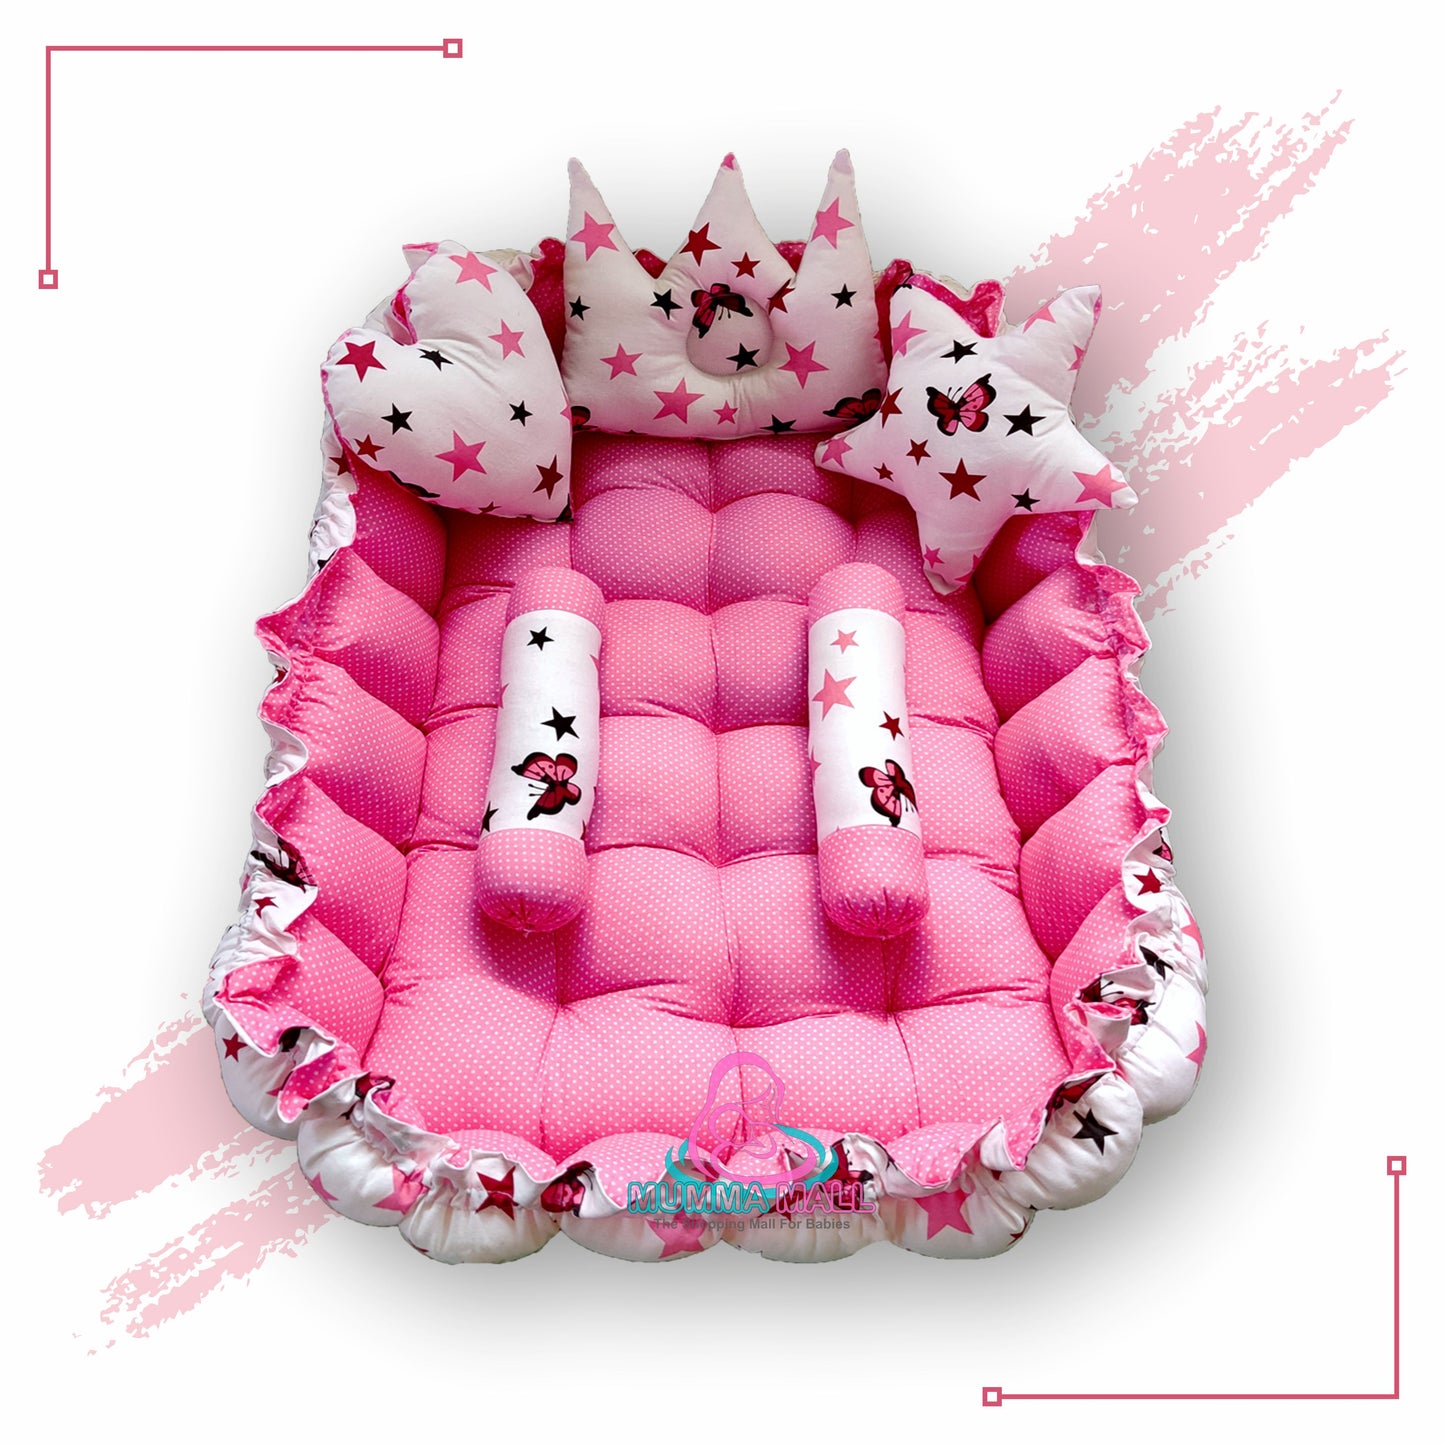 Rectangle baby tub bed with with set of 5 pillows as neck support, side support and toy (Pink and White)